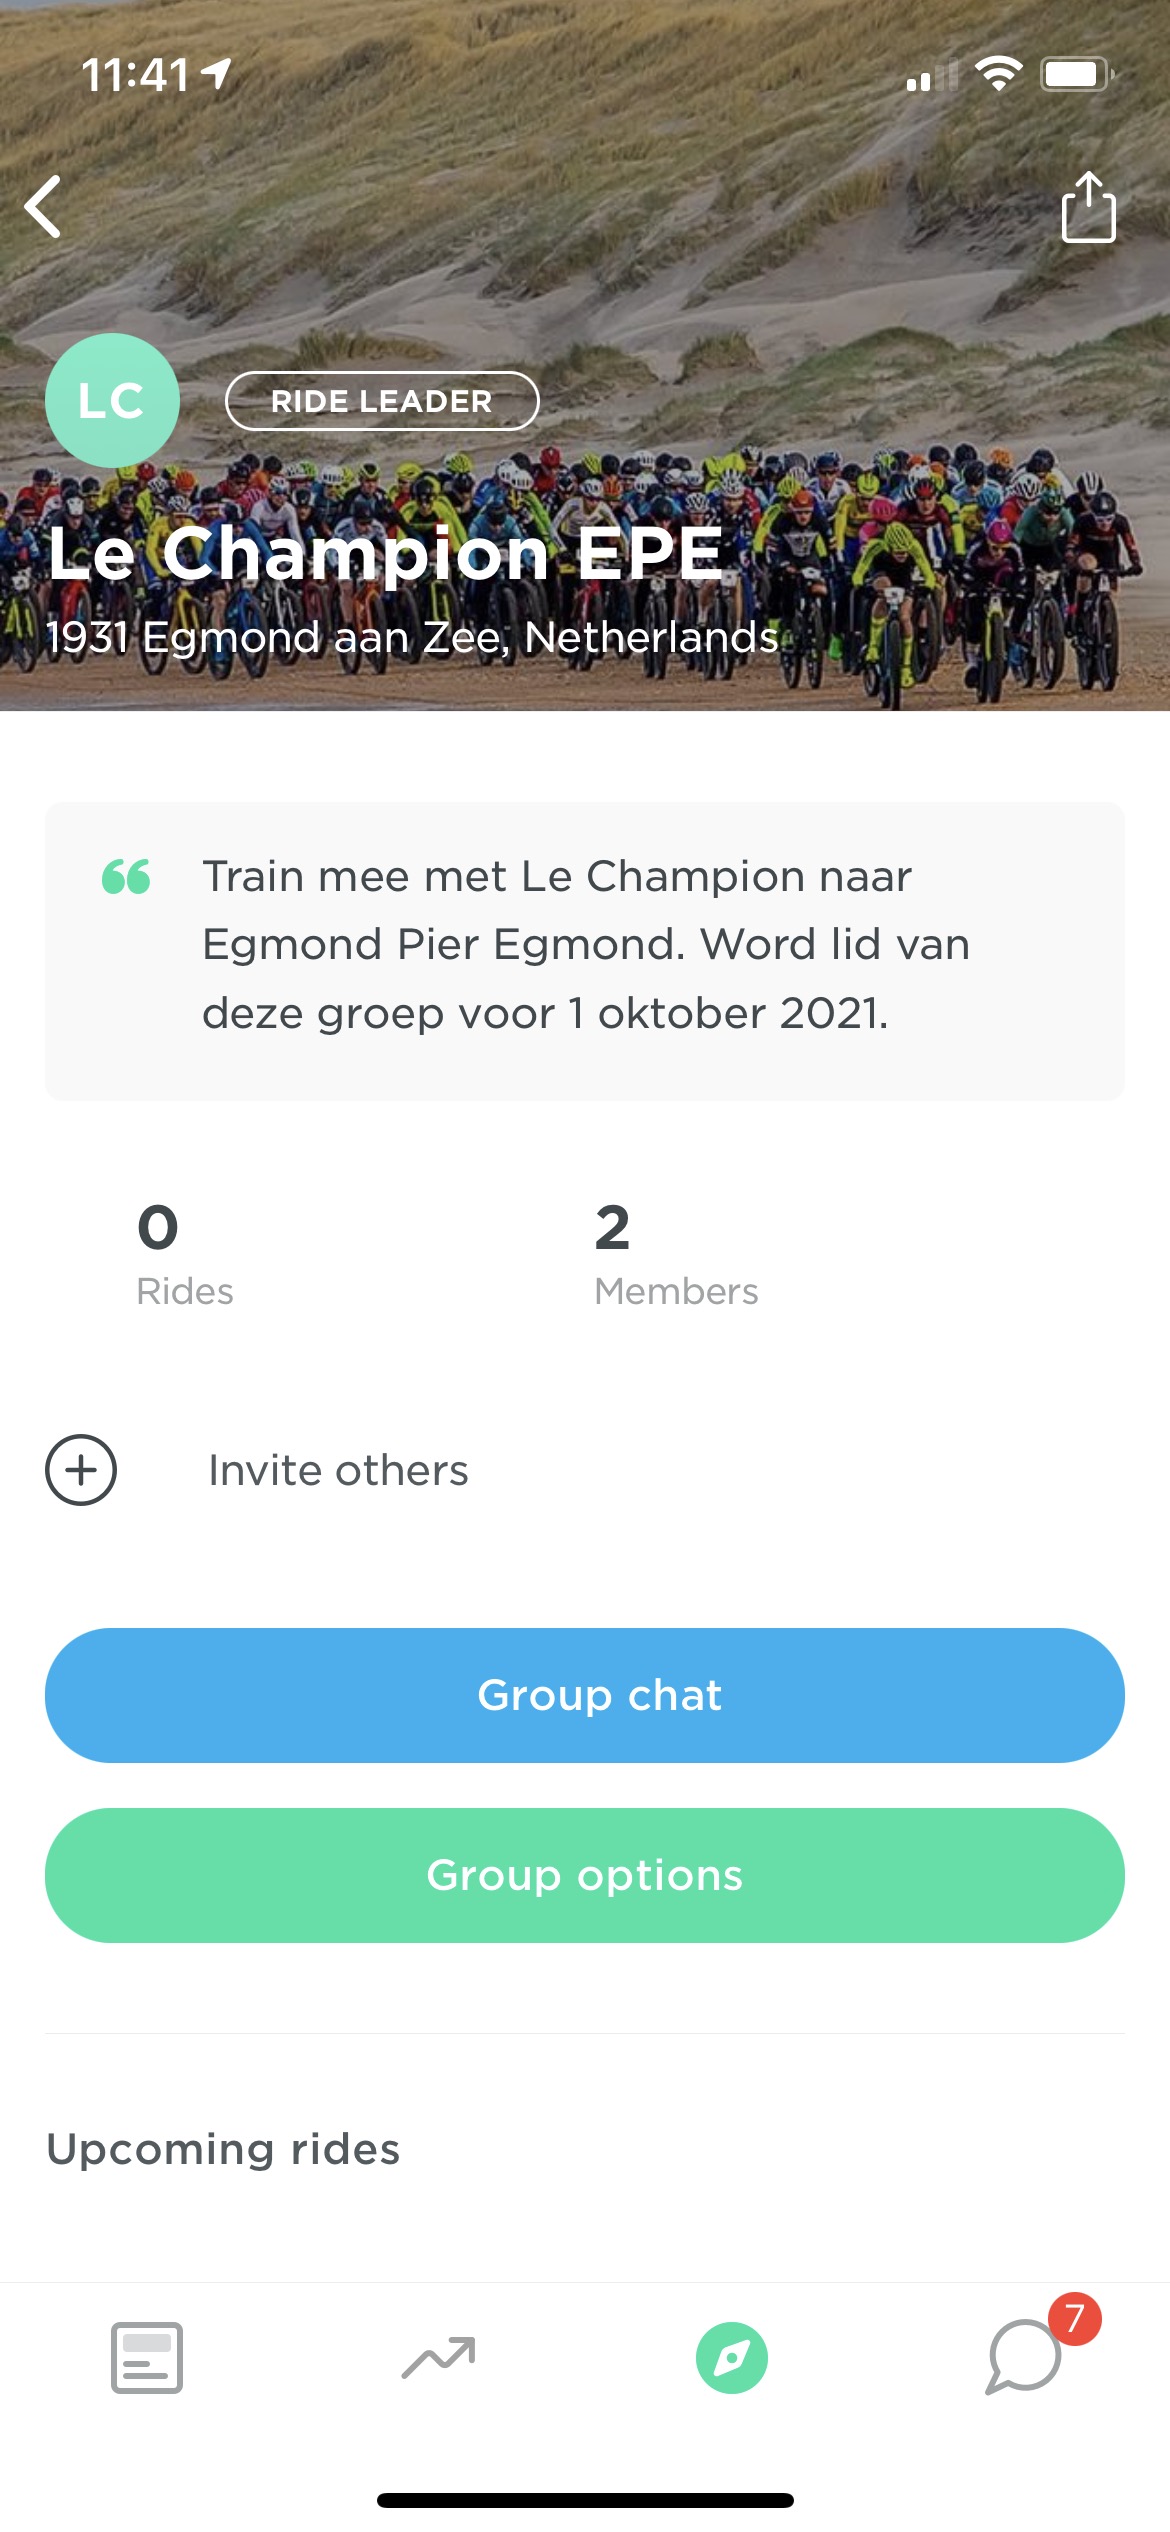 Le Champion x Join Cycling training schedule